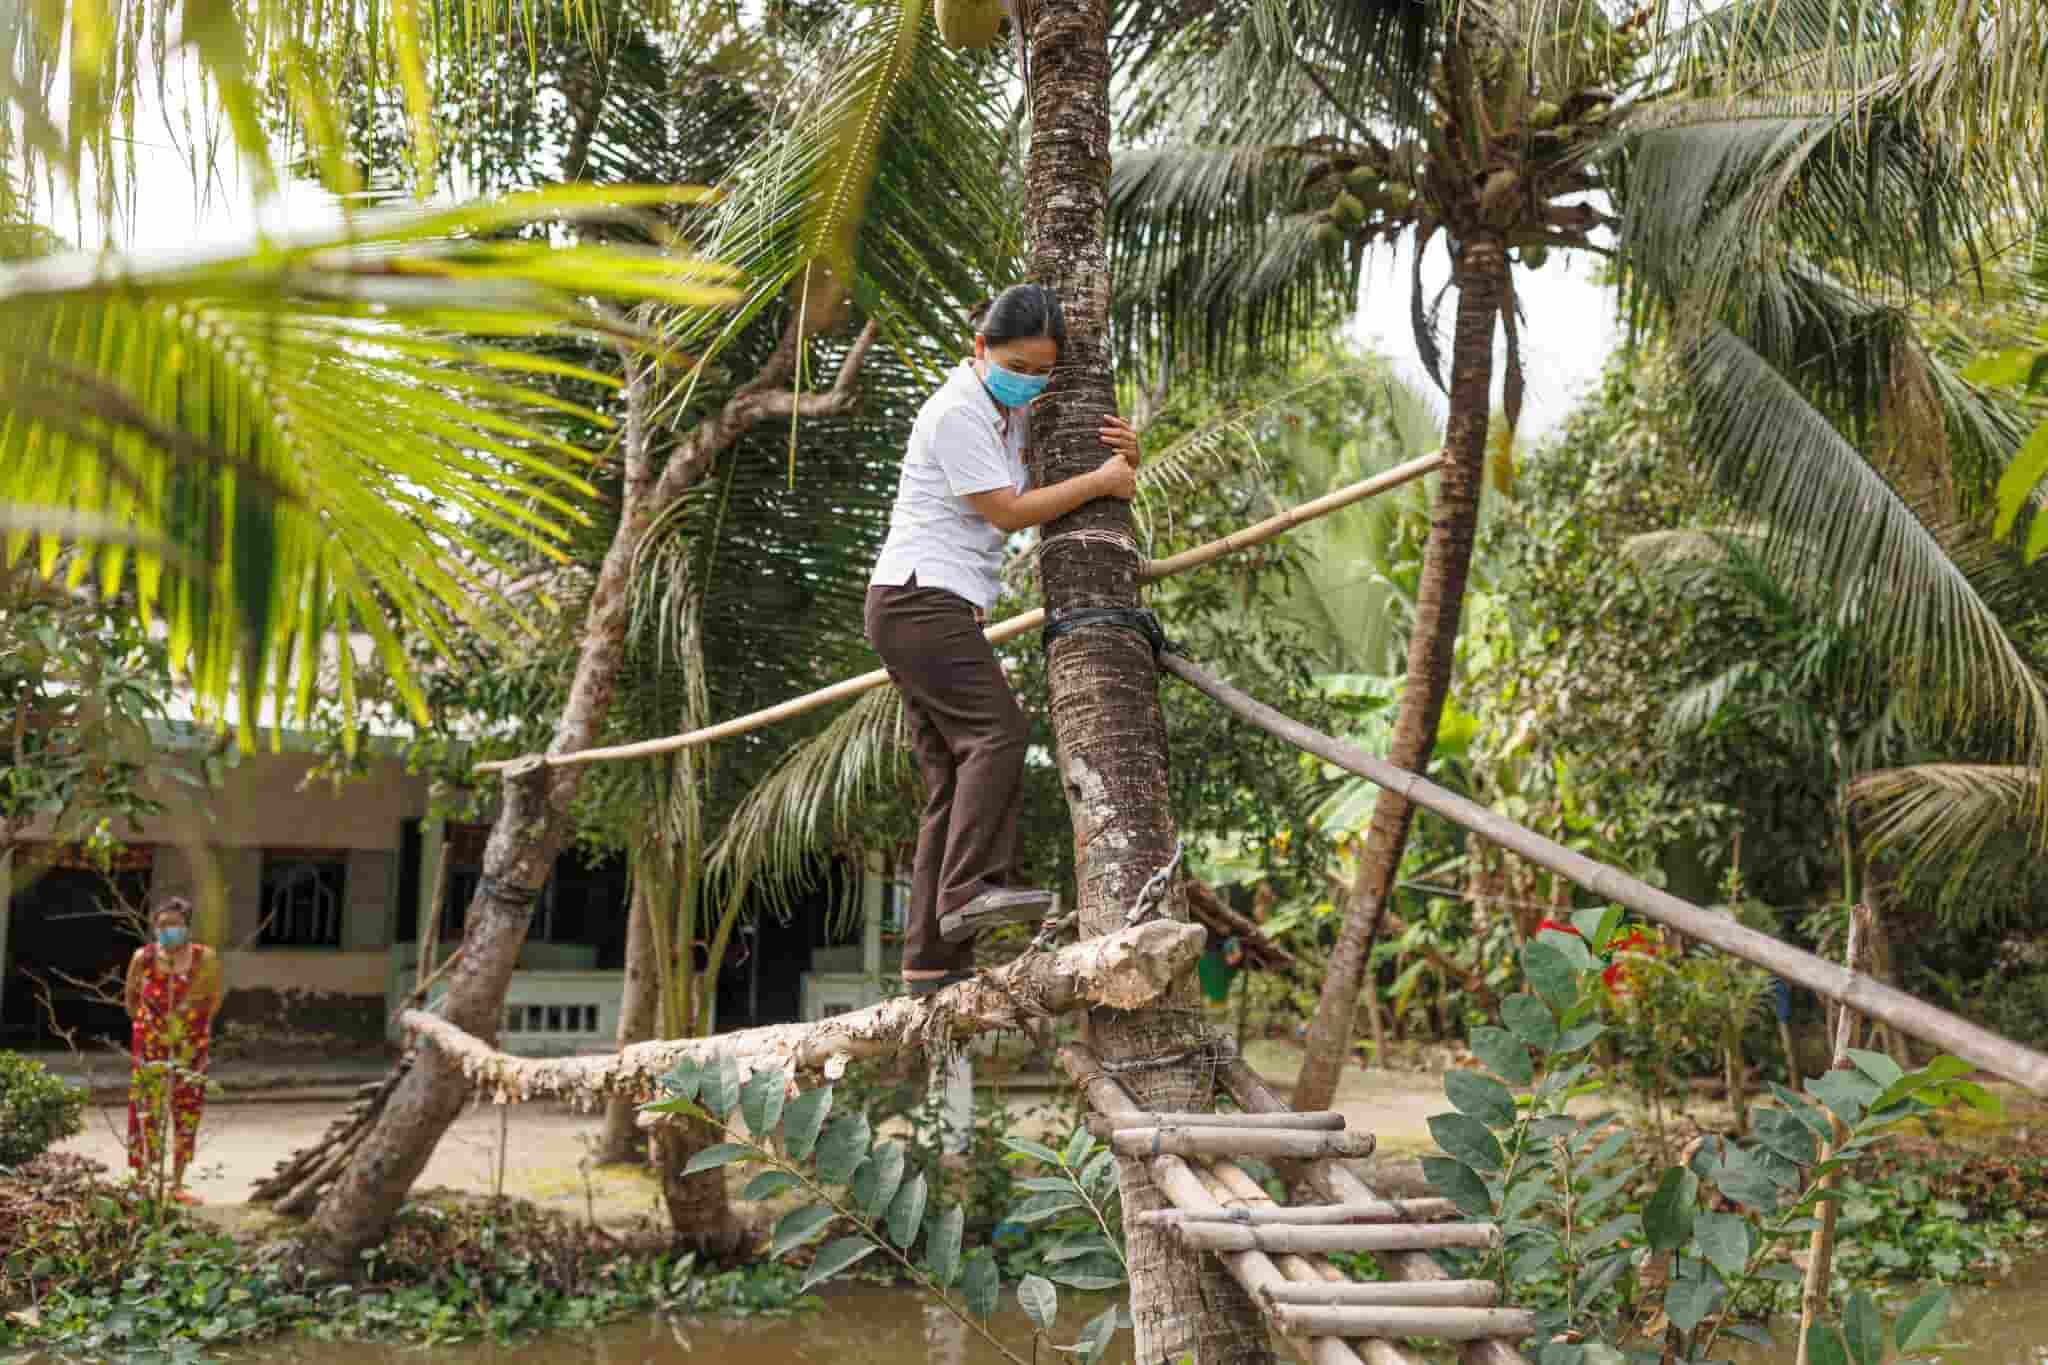 Ánh Dương centre social worker Lê Thế Quyên attempts to cross a ‘monkey bridge’, which are simple wood or bamboo walkways built across streams, sometimes without handrails. Photo by Mervin Lee